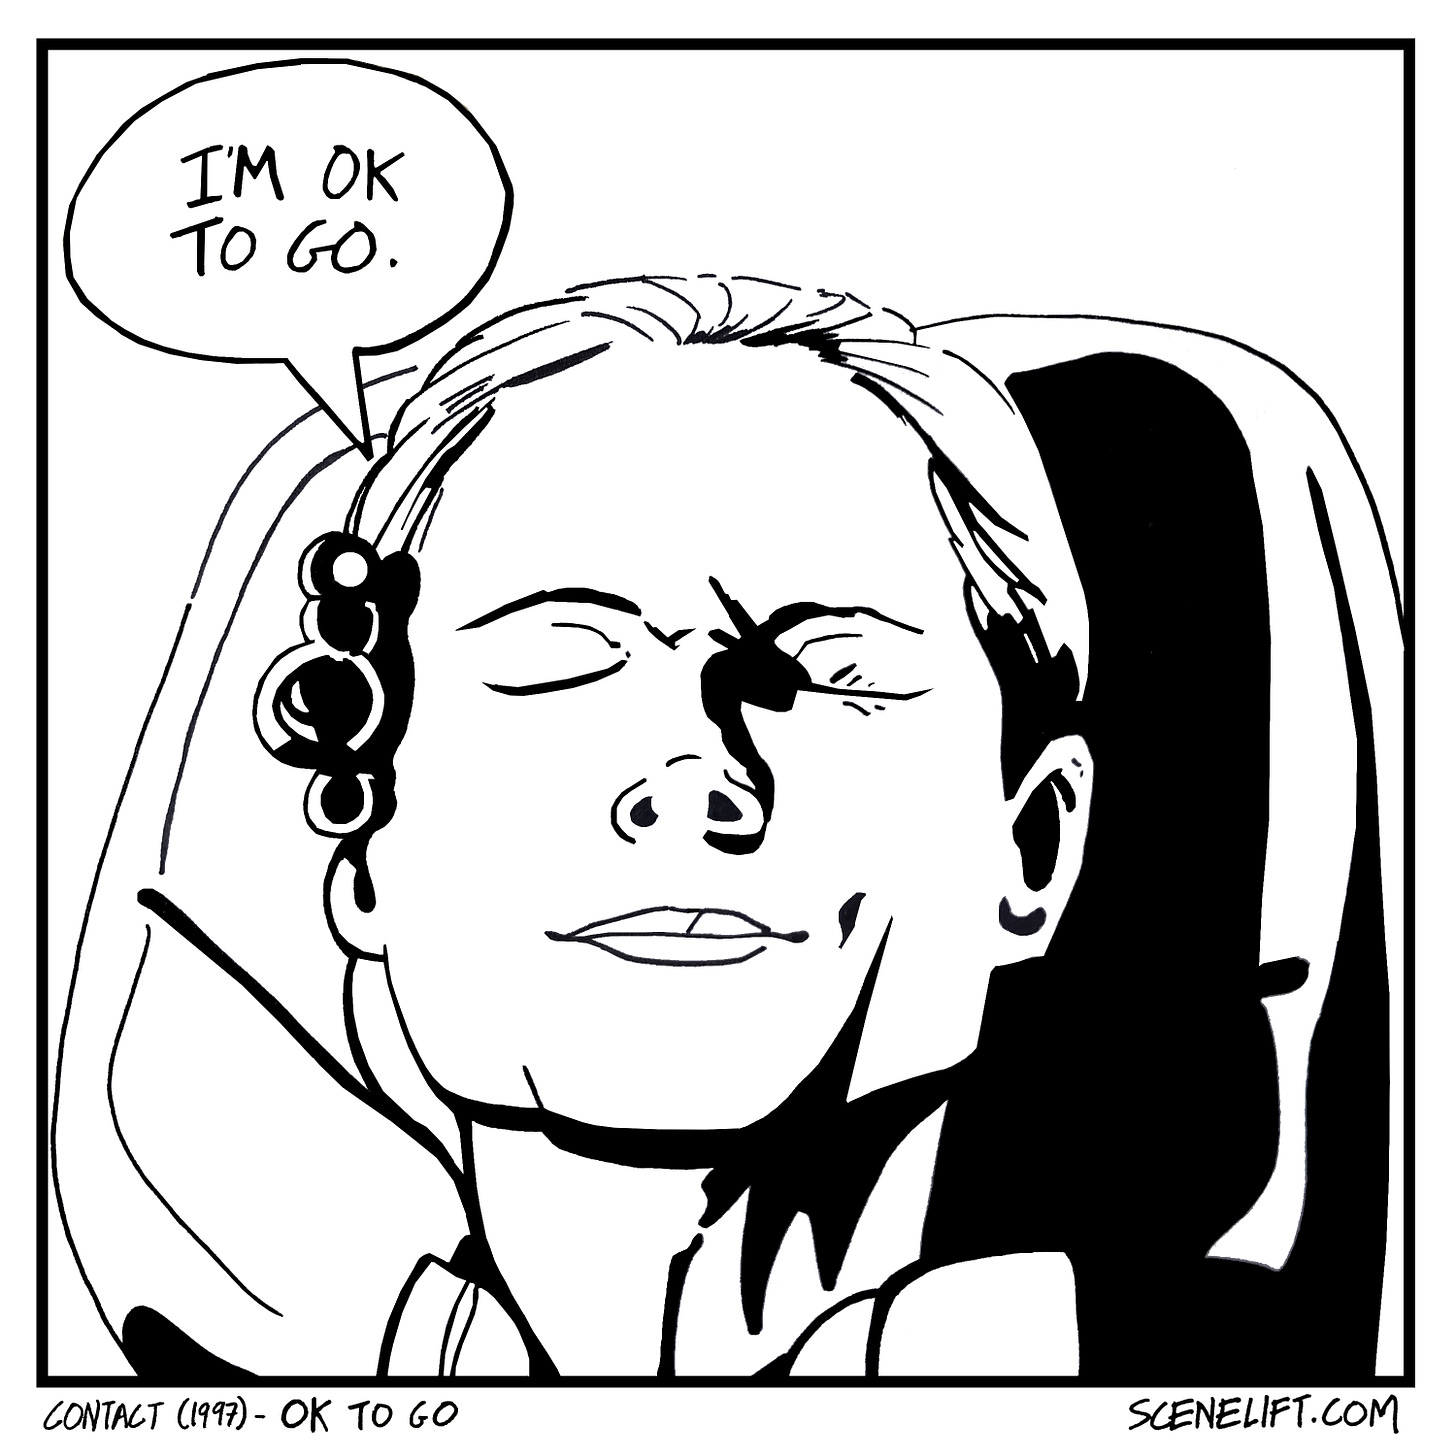 Fan art comic of Ellie in the alien spacecraft saying she is okay to go in the movie Contact